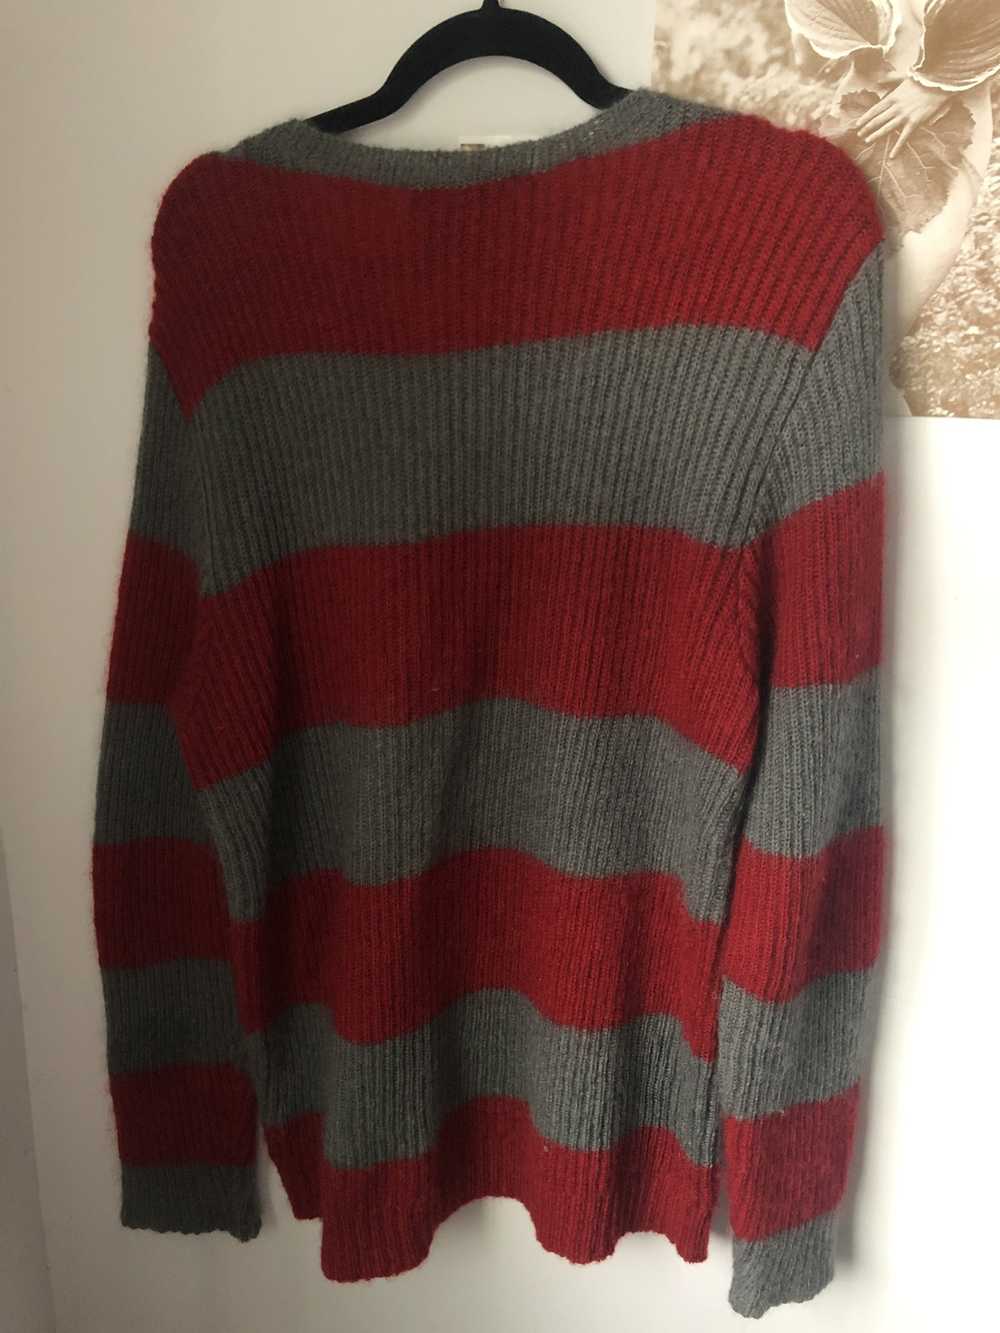 Undercover Undercover Grey and Red Striped Sweater - image 2